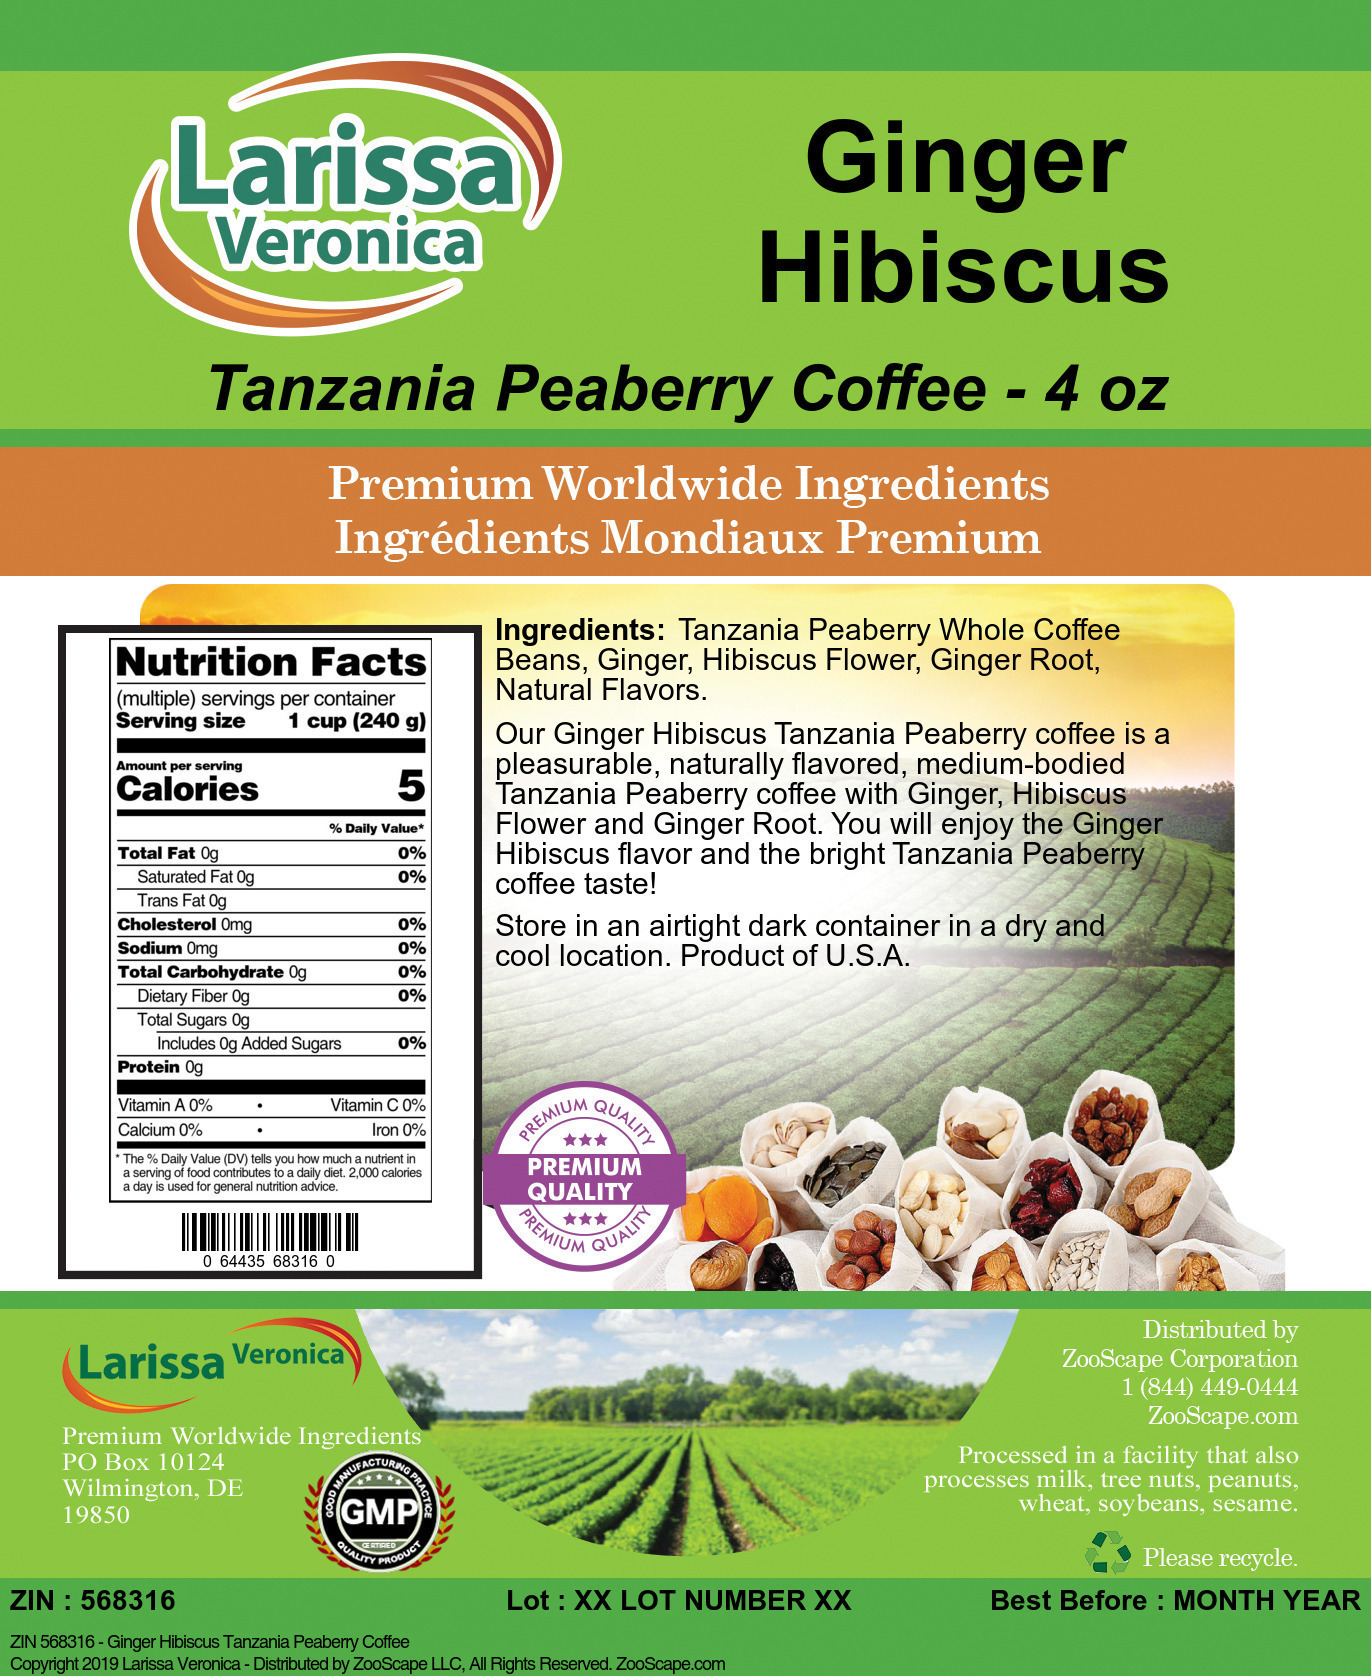 Ginger Hibiscus Tanzania Peaberry Coffee - Label